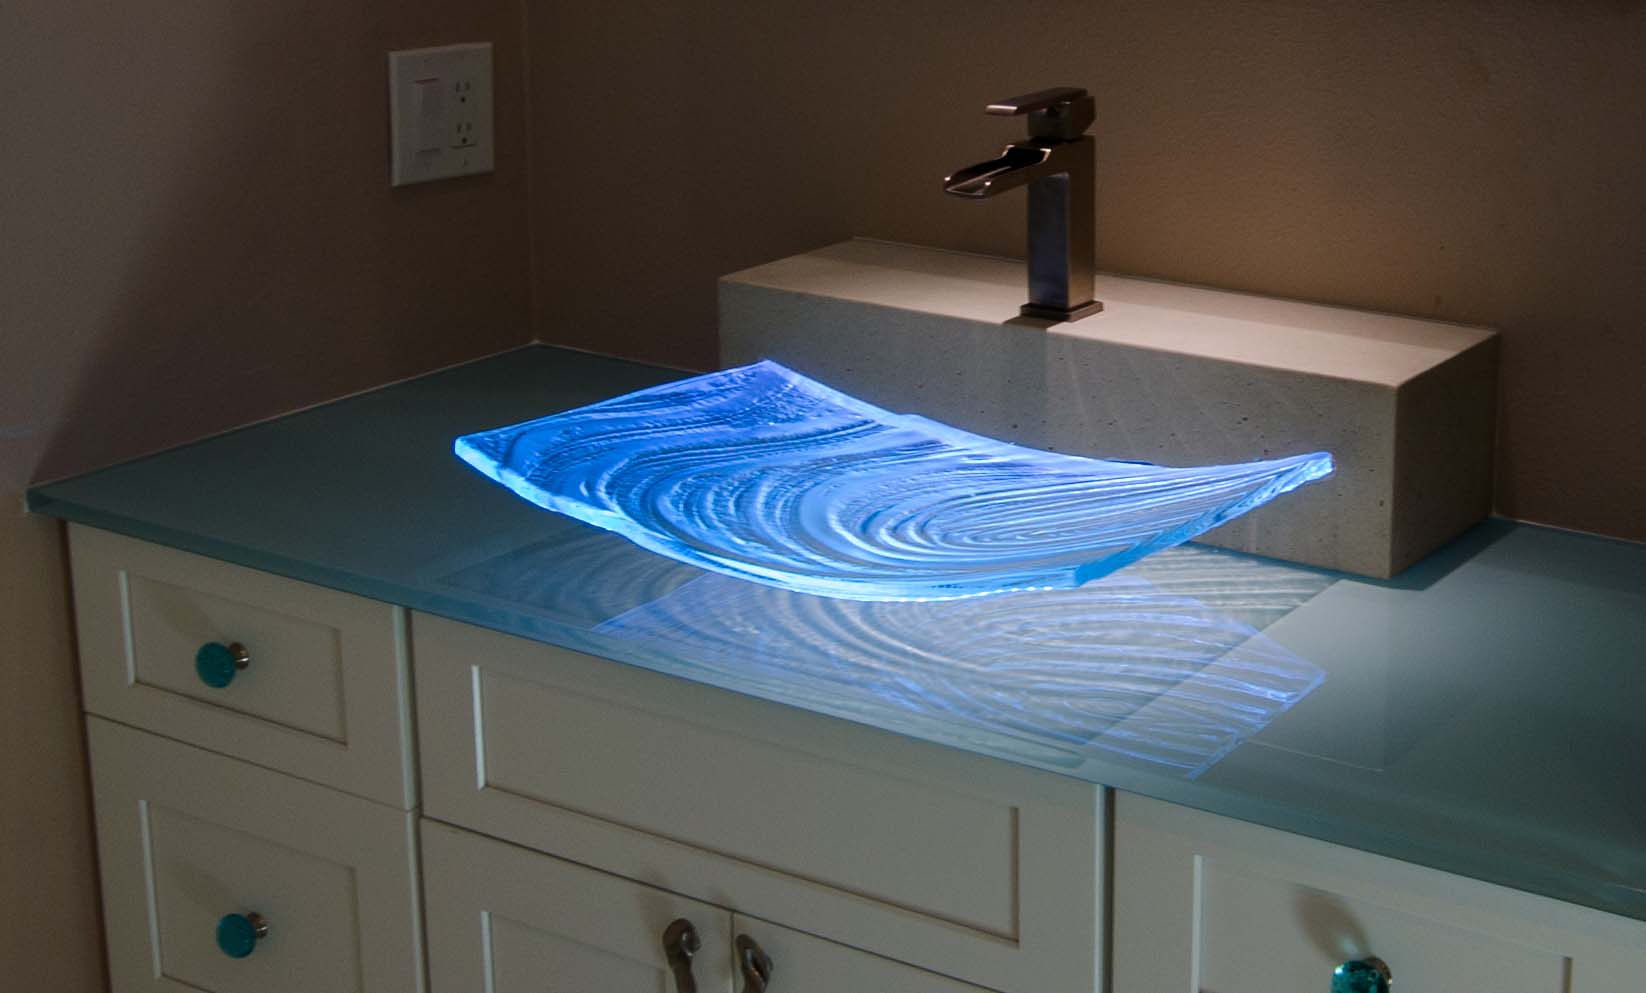 New Glass Sink Design From Downing Designs Downing Designs